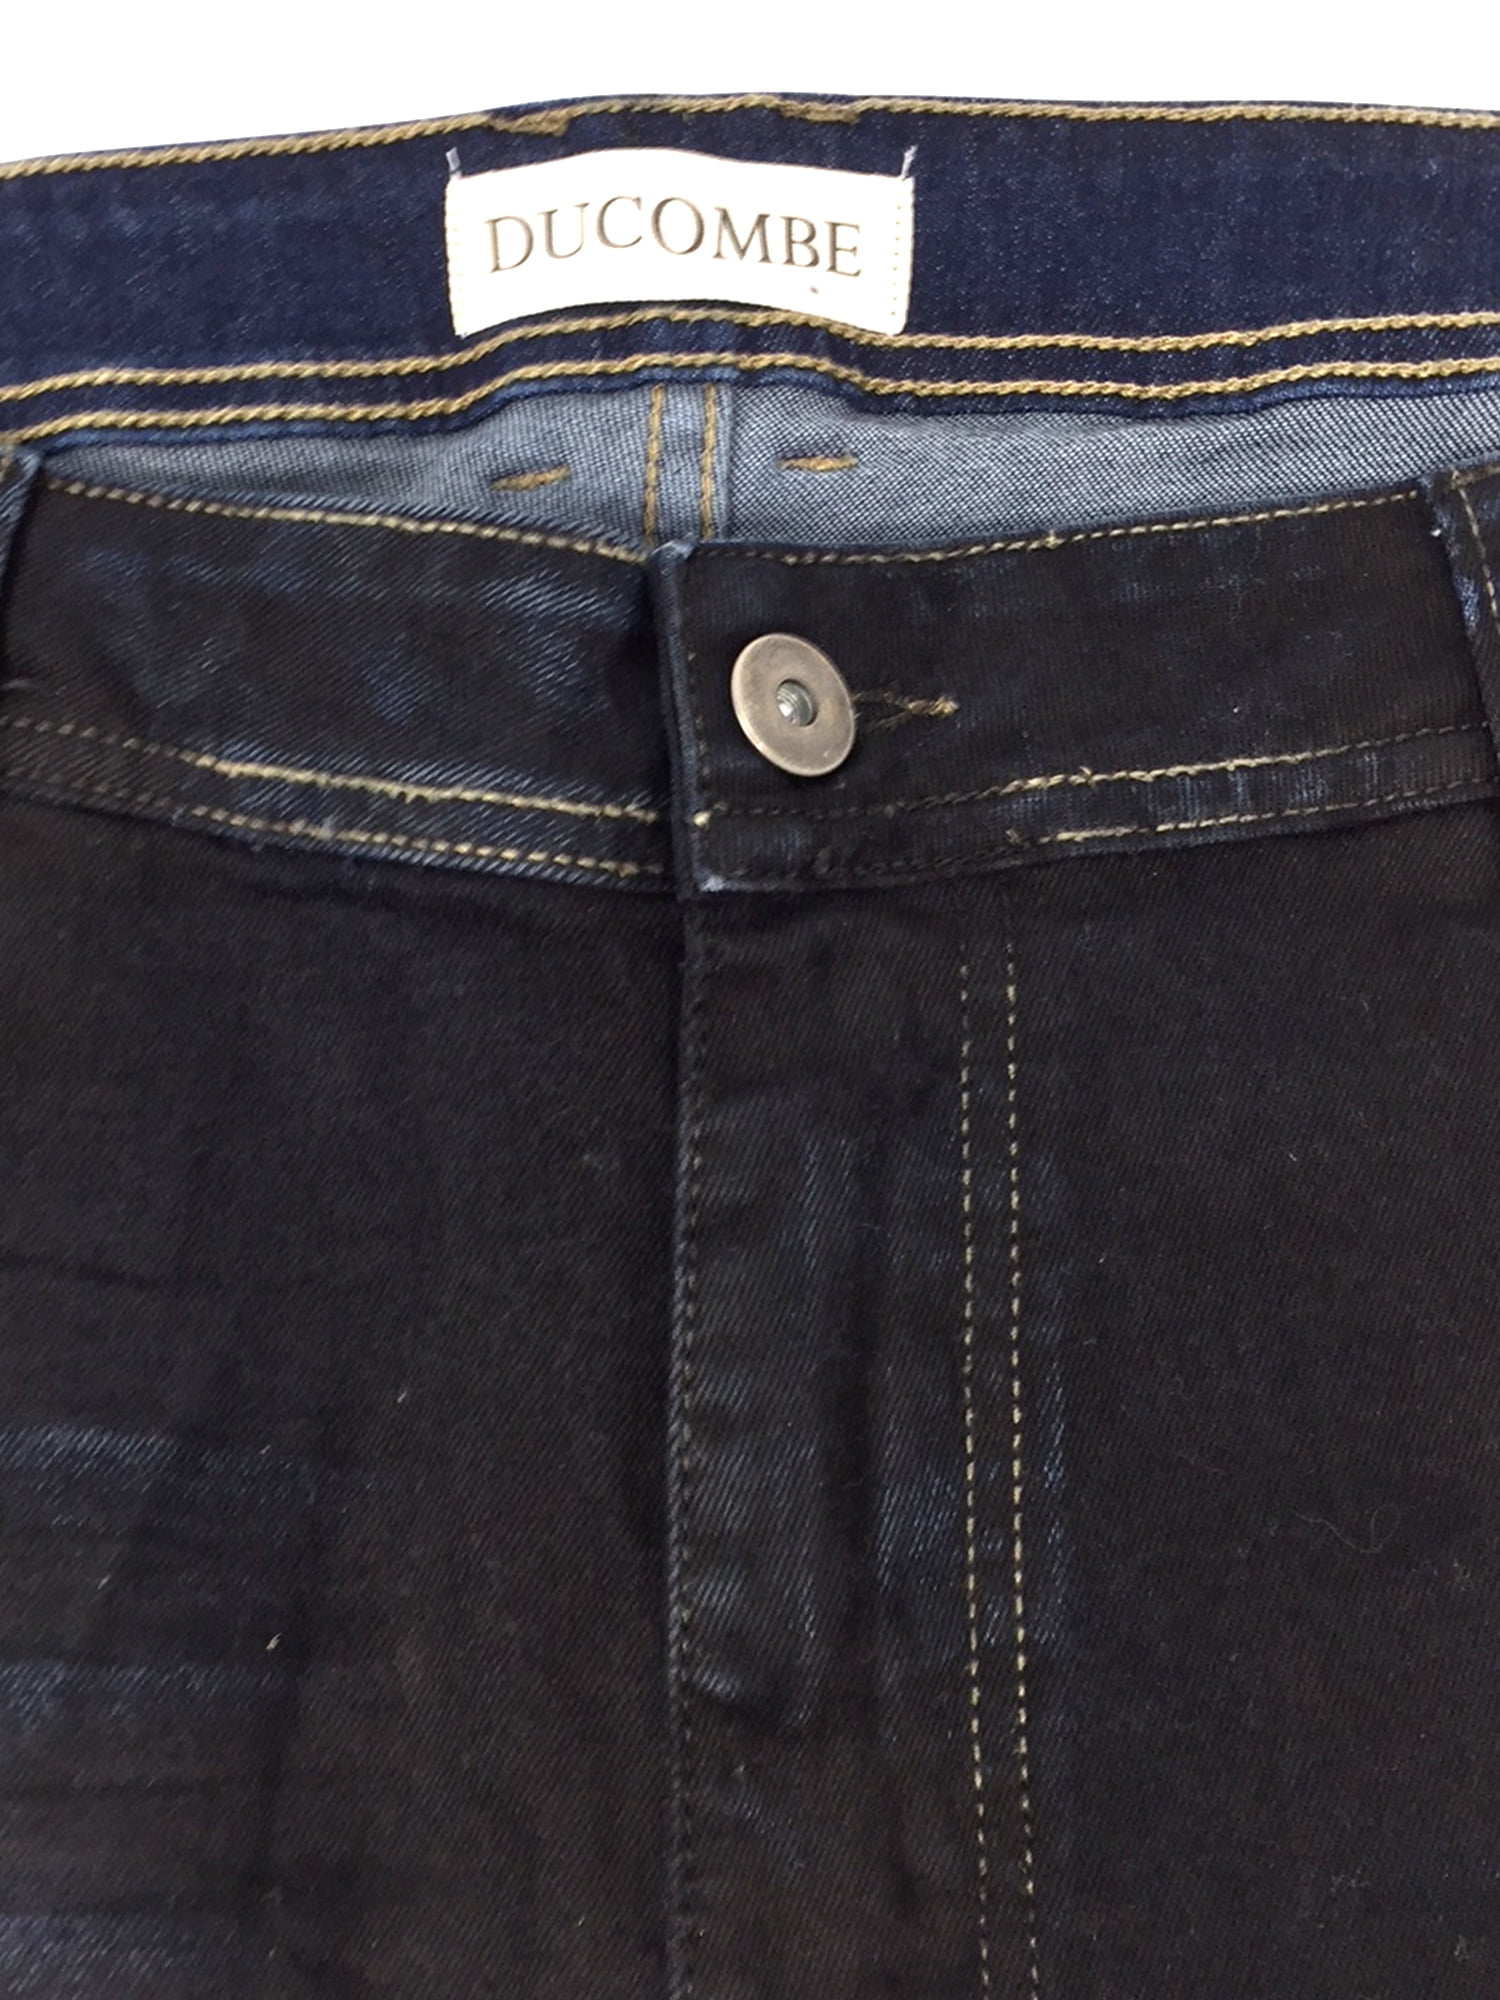 29 inch length mens jeans